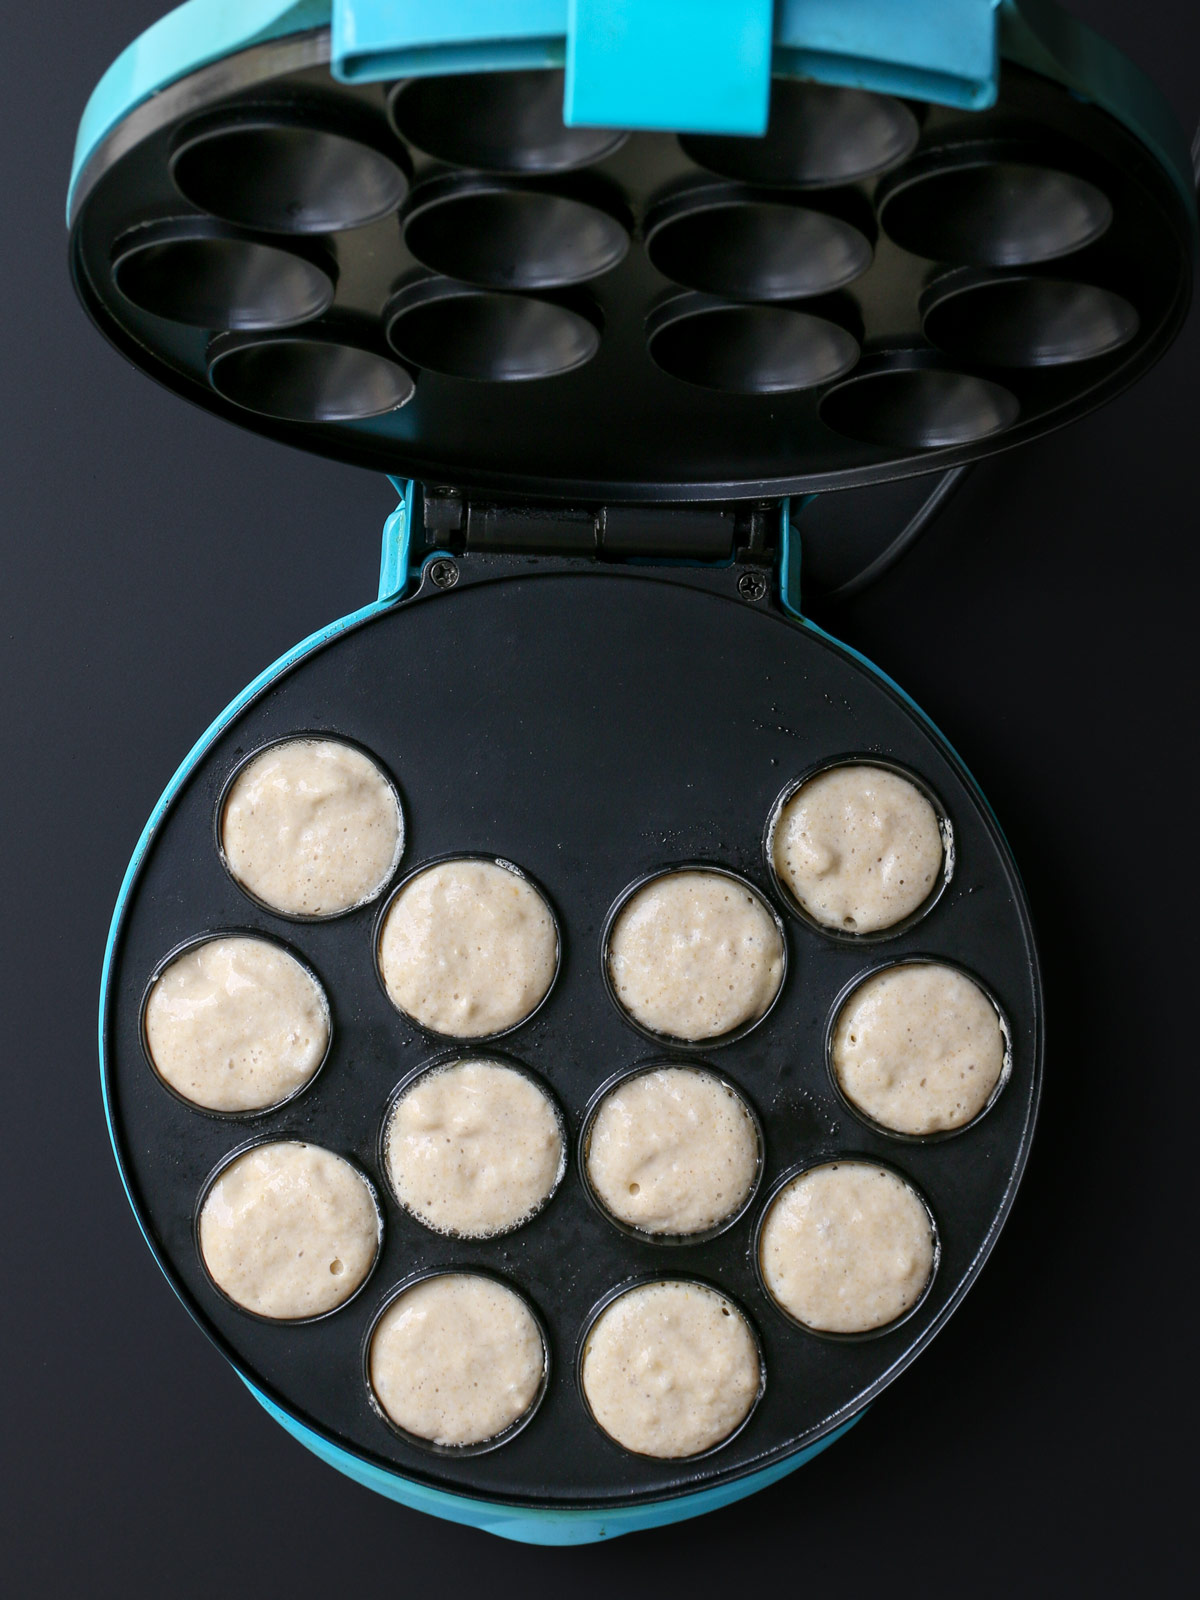 aebleskiver batter added to cups.